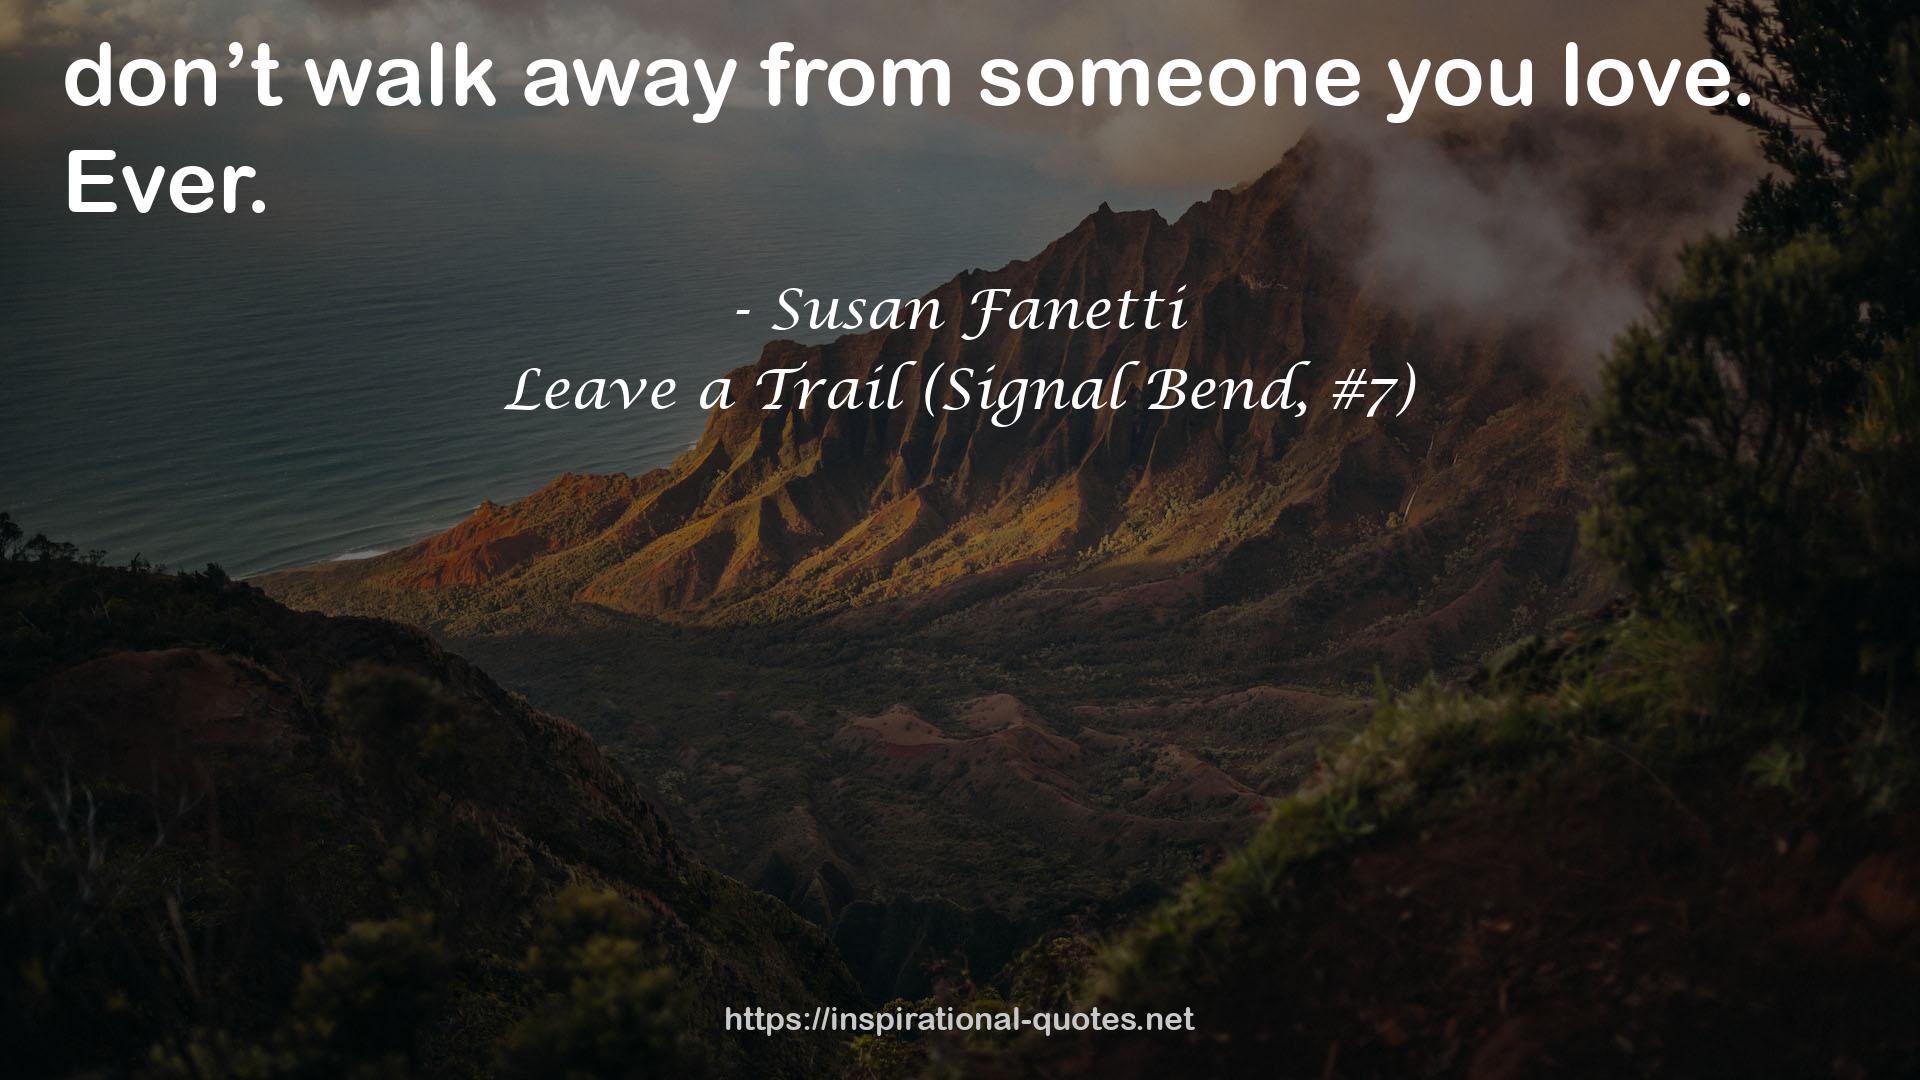 Leave a Trail (Signal Bend, #7) QUOTES